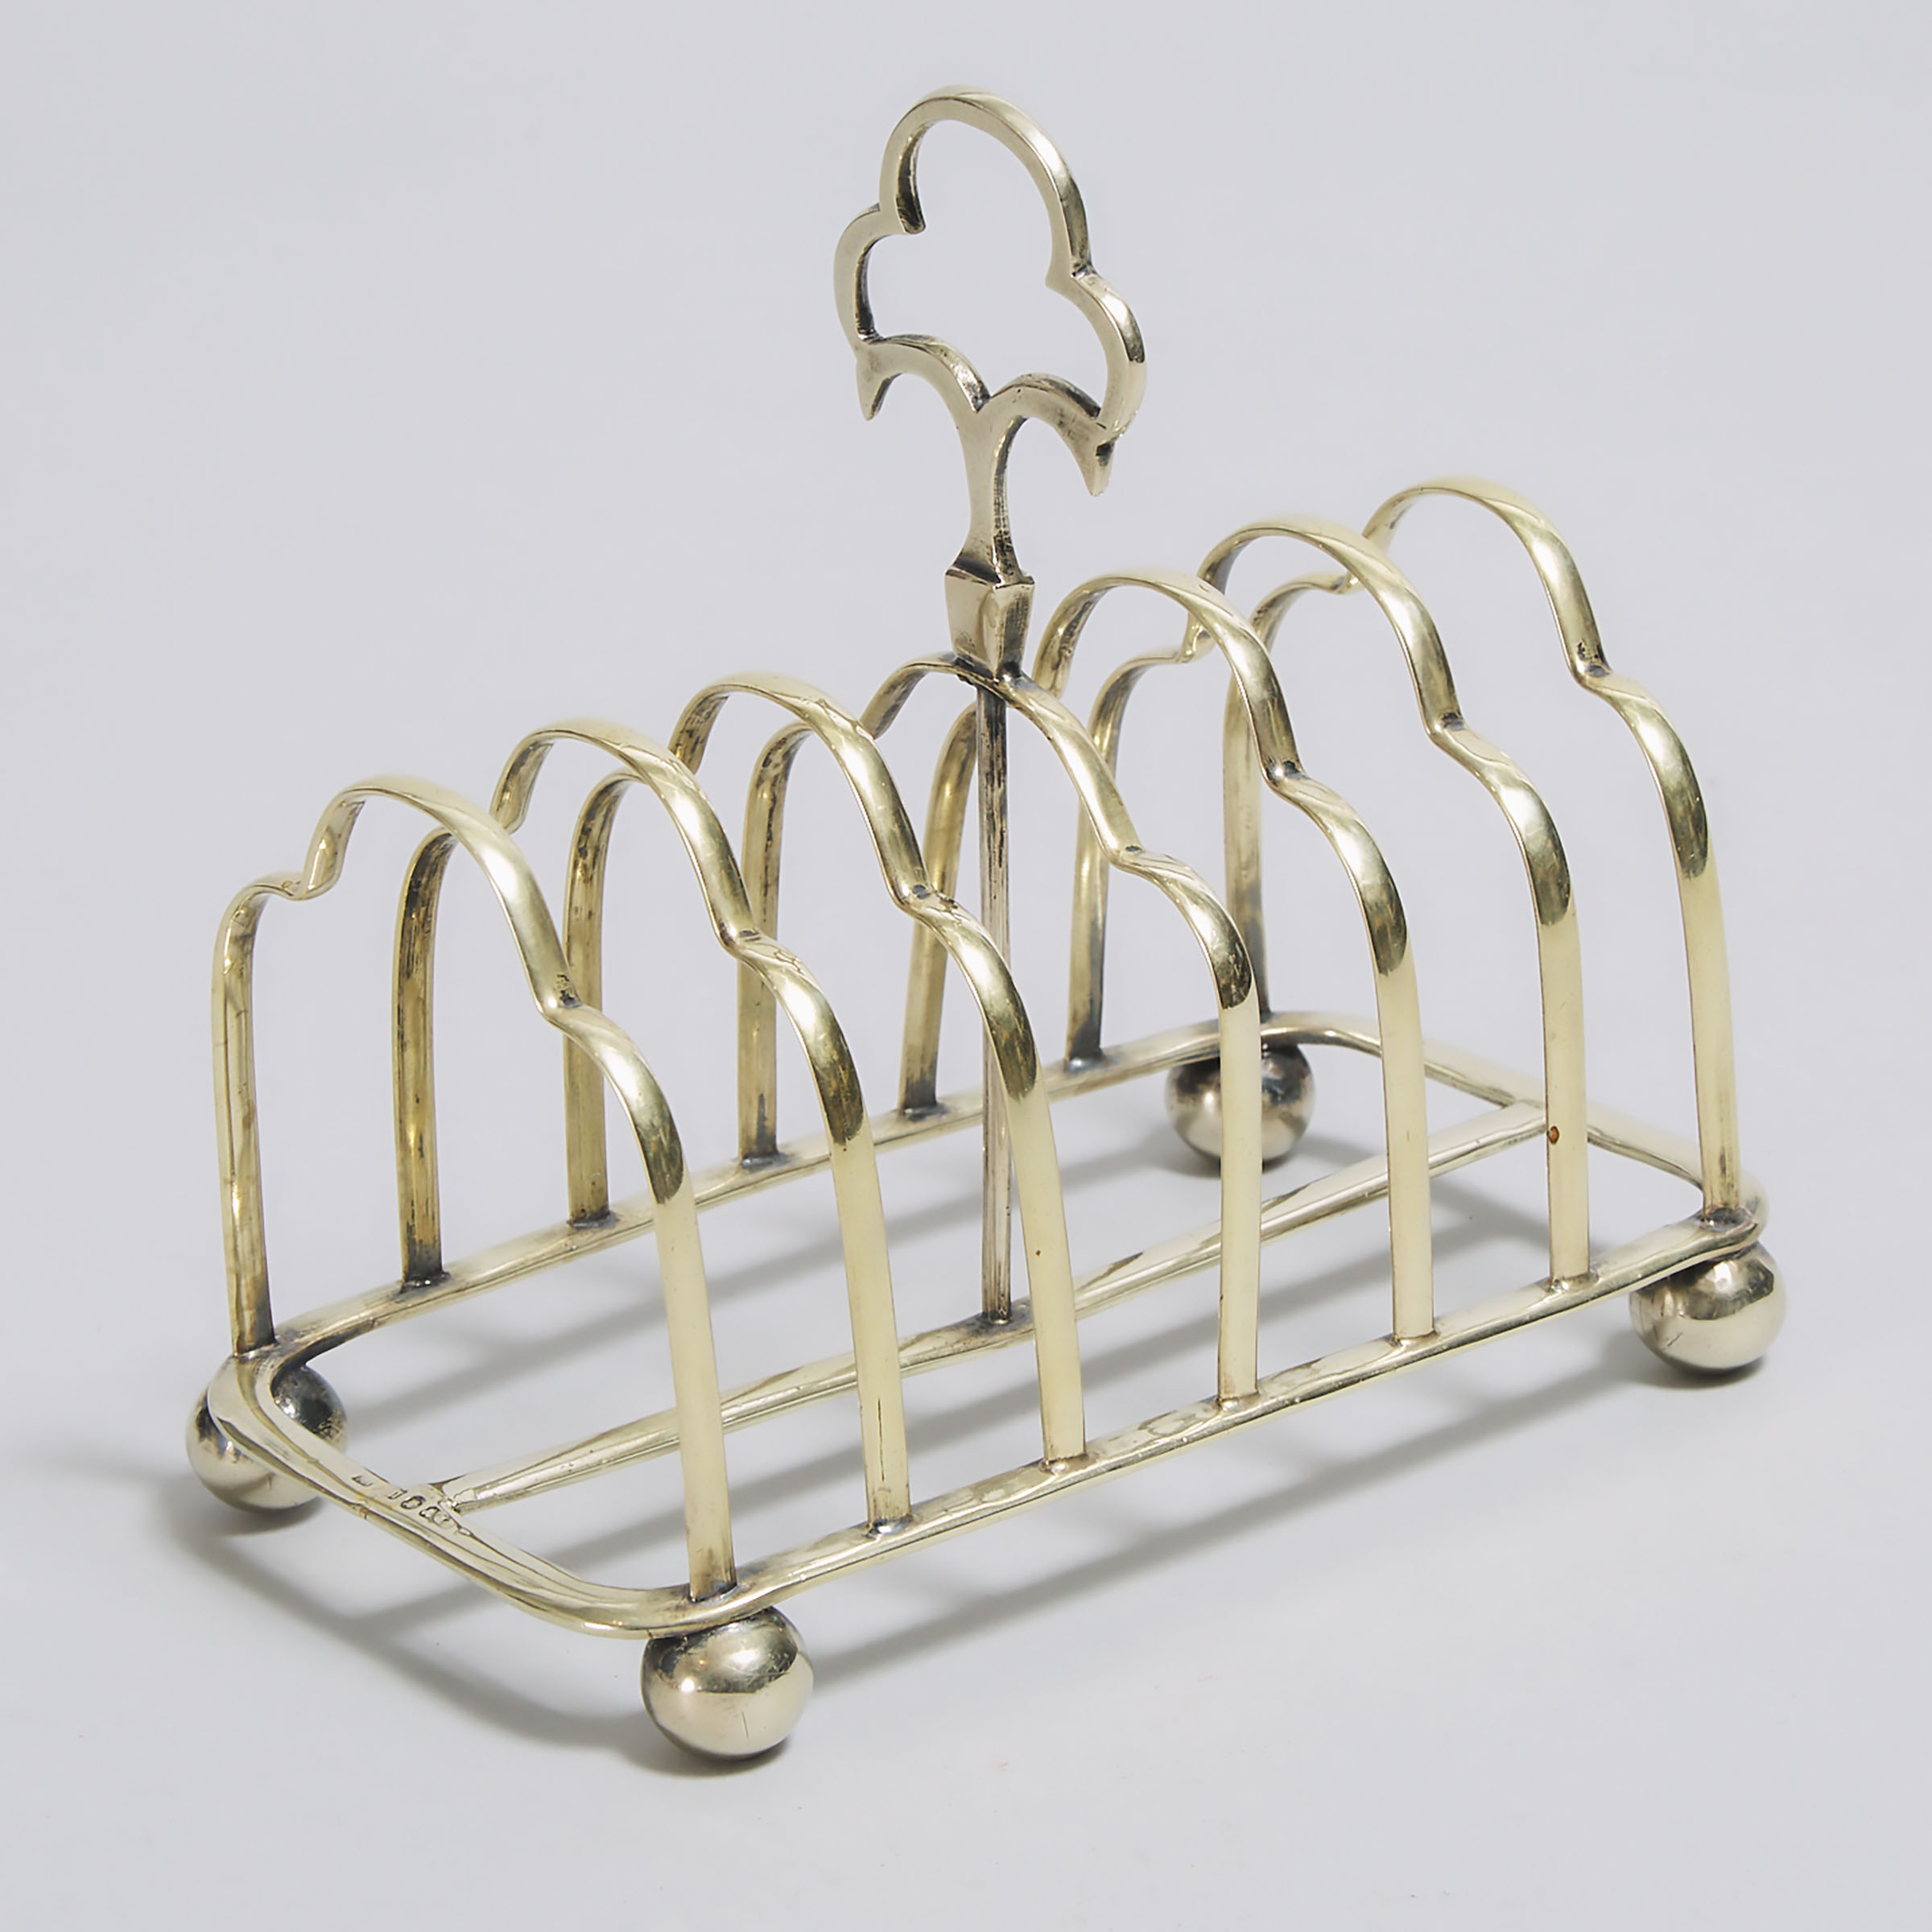 Victorian Silver Plate Toast Rack, 19th century